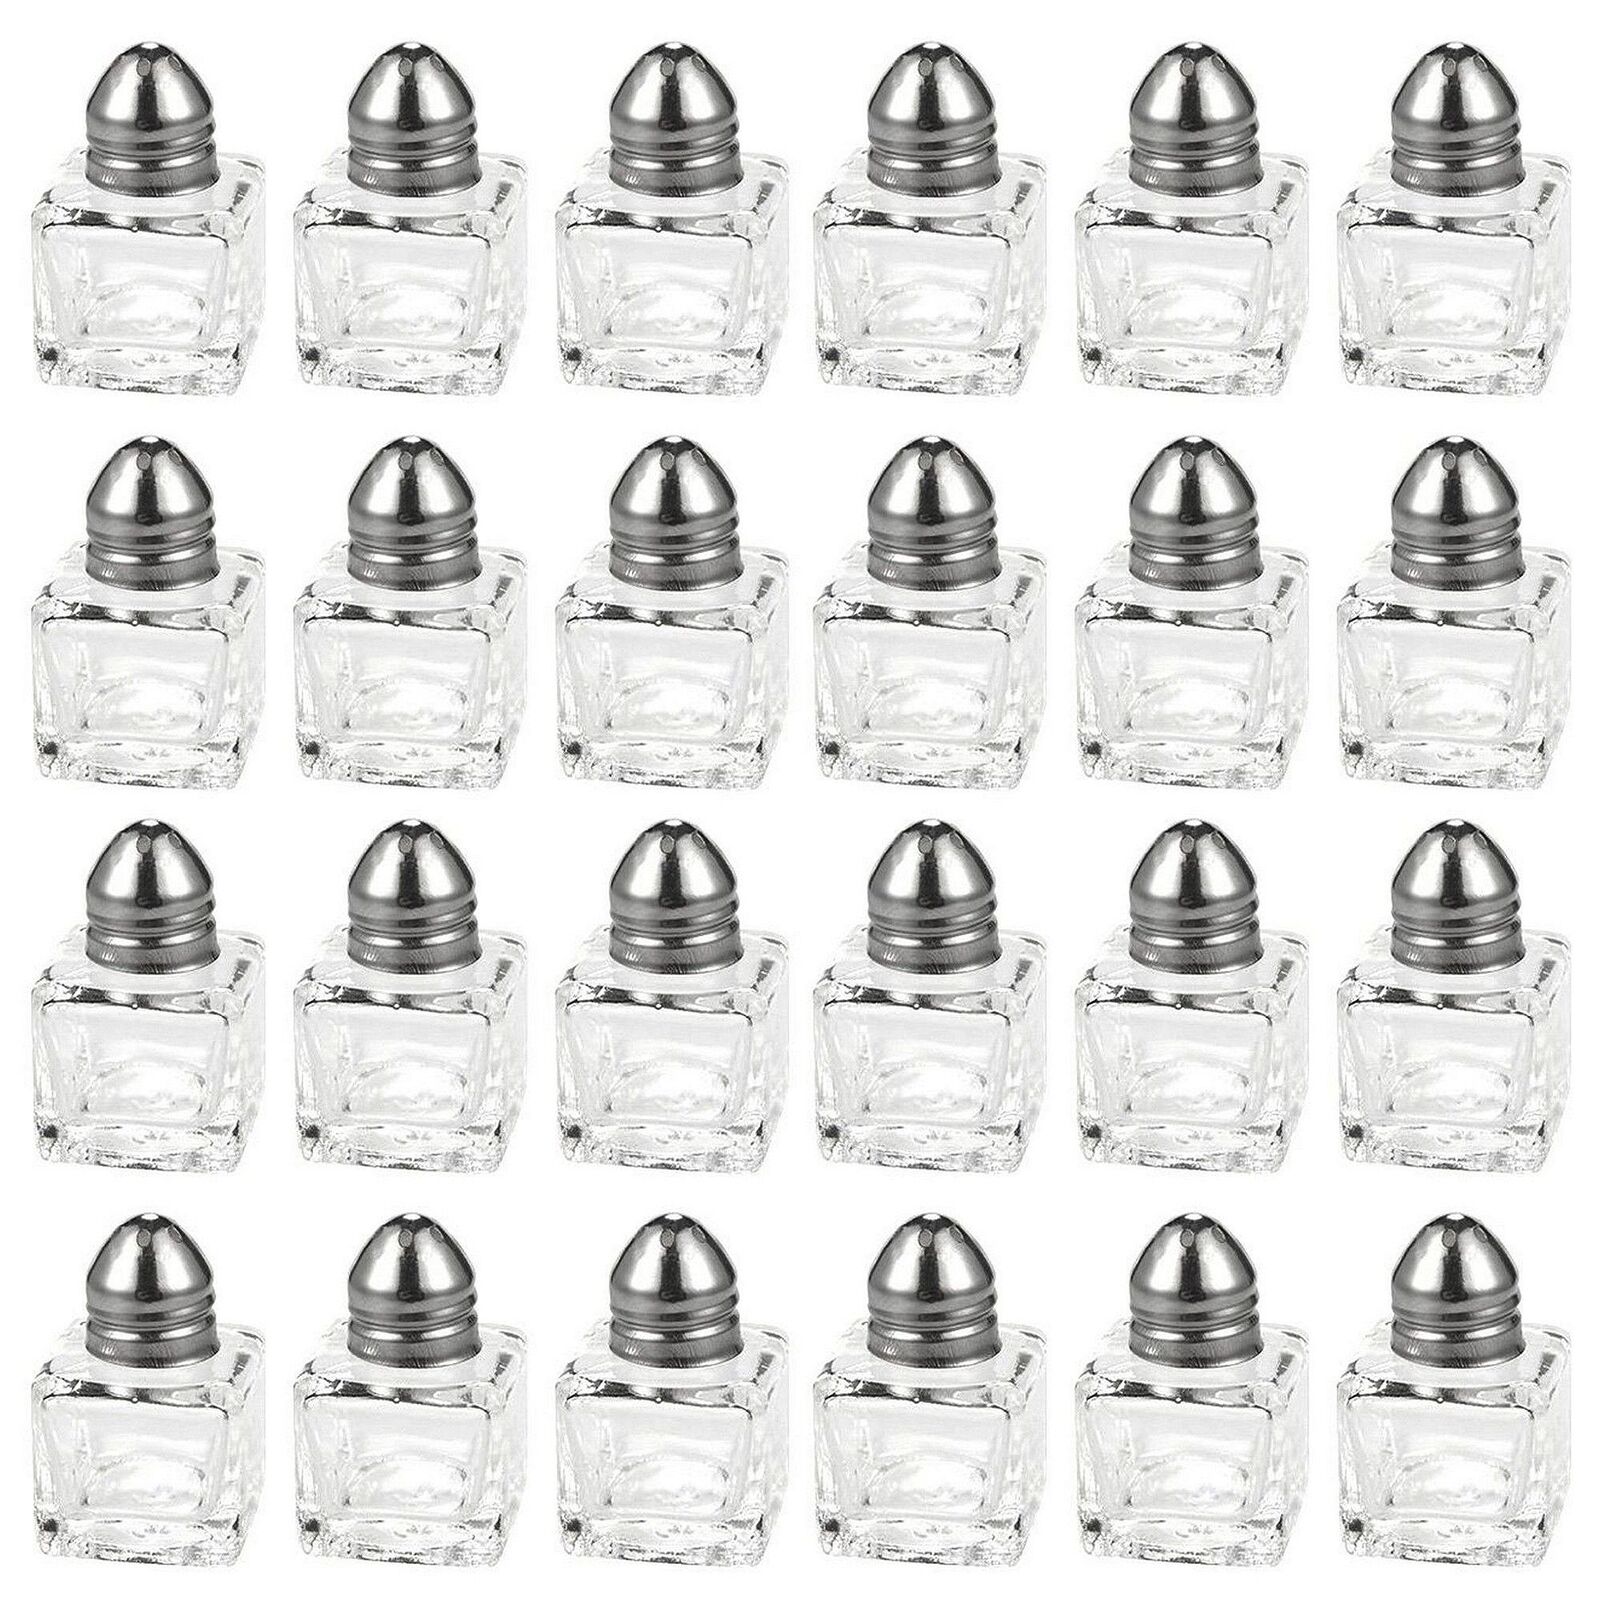 24 PCS 0.5 oz Stainless Steel Top Salt & Pepper Shakers Glass Bottle Kitchenware